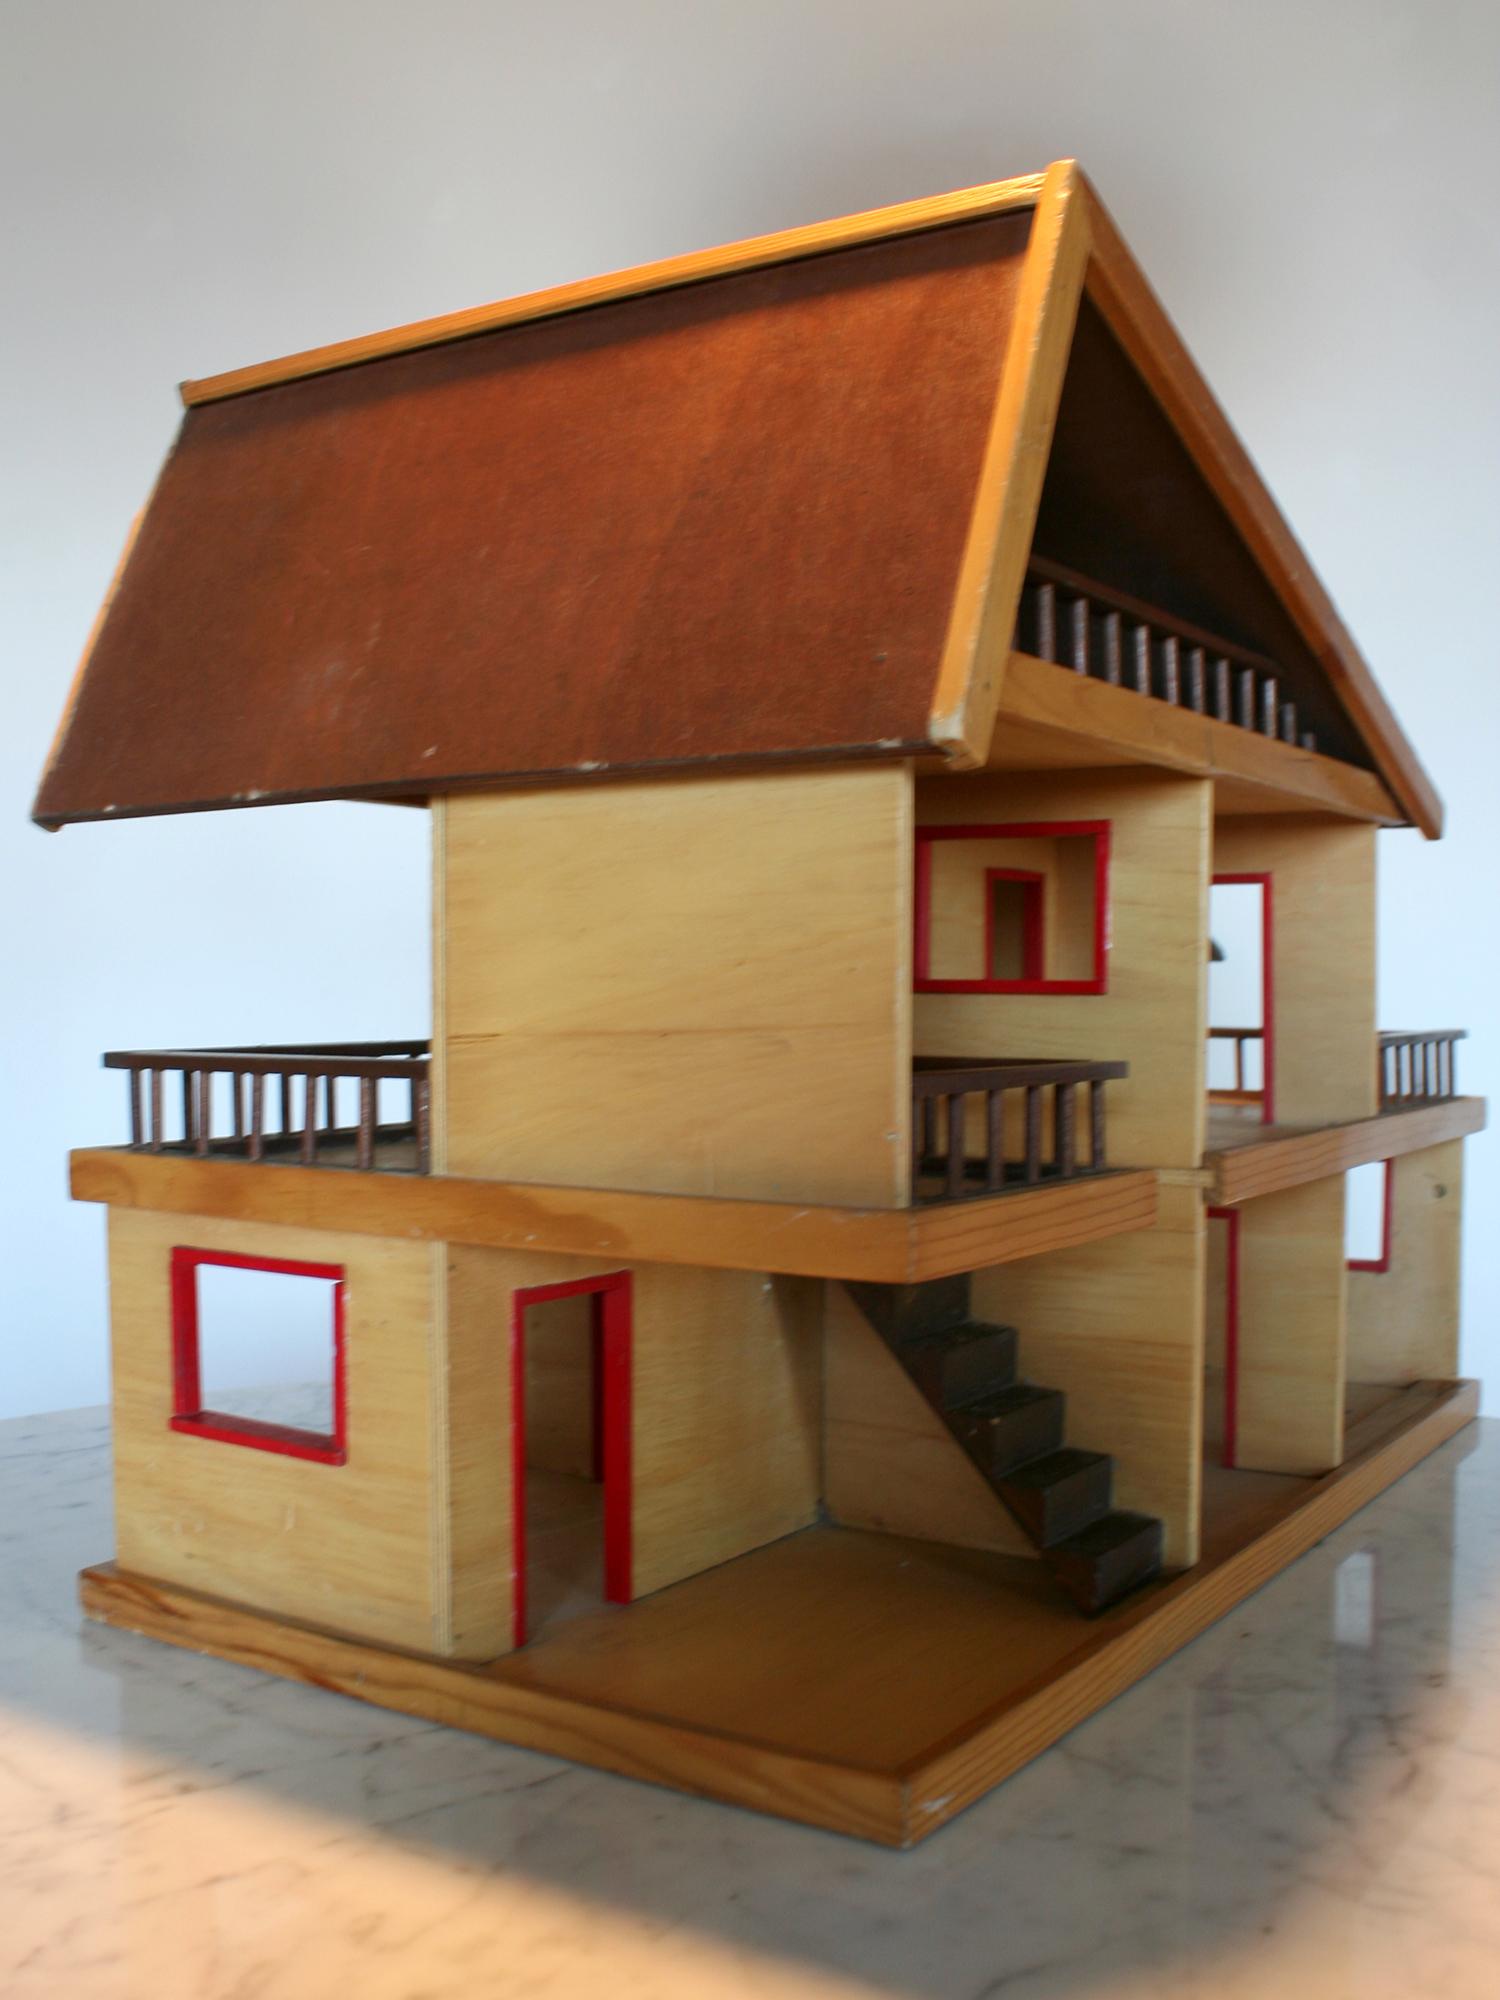 A wooden dollhouse from the 1960s. Chalet-shaped, its rooms are open.
Good overall condition. A wooden edge and a plinth are missing.